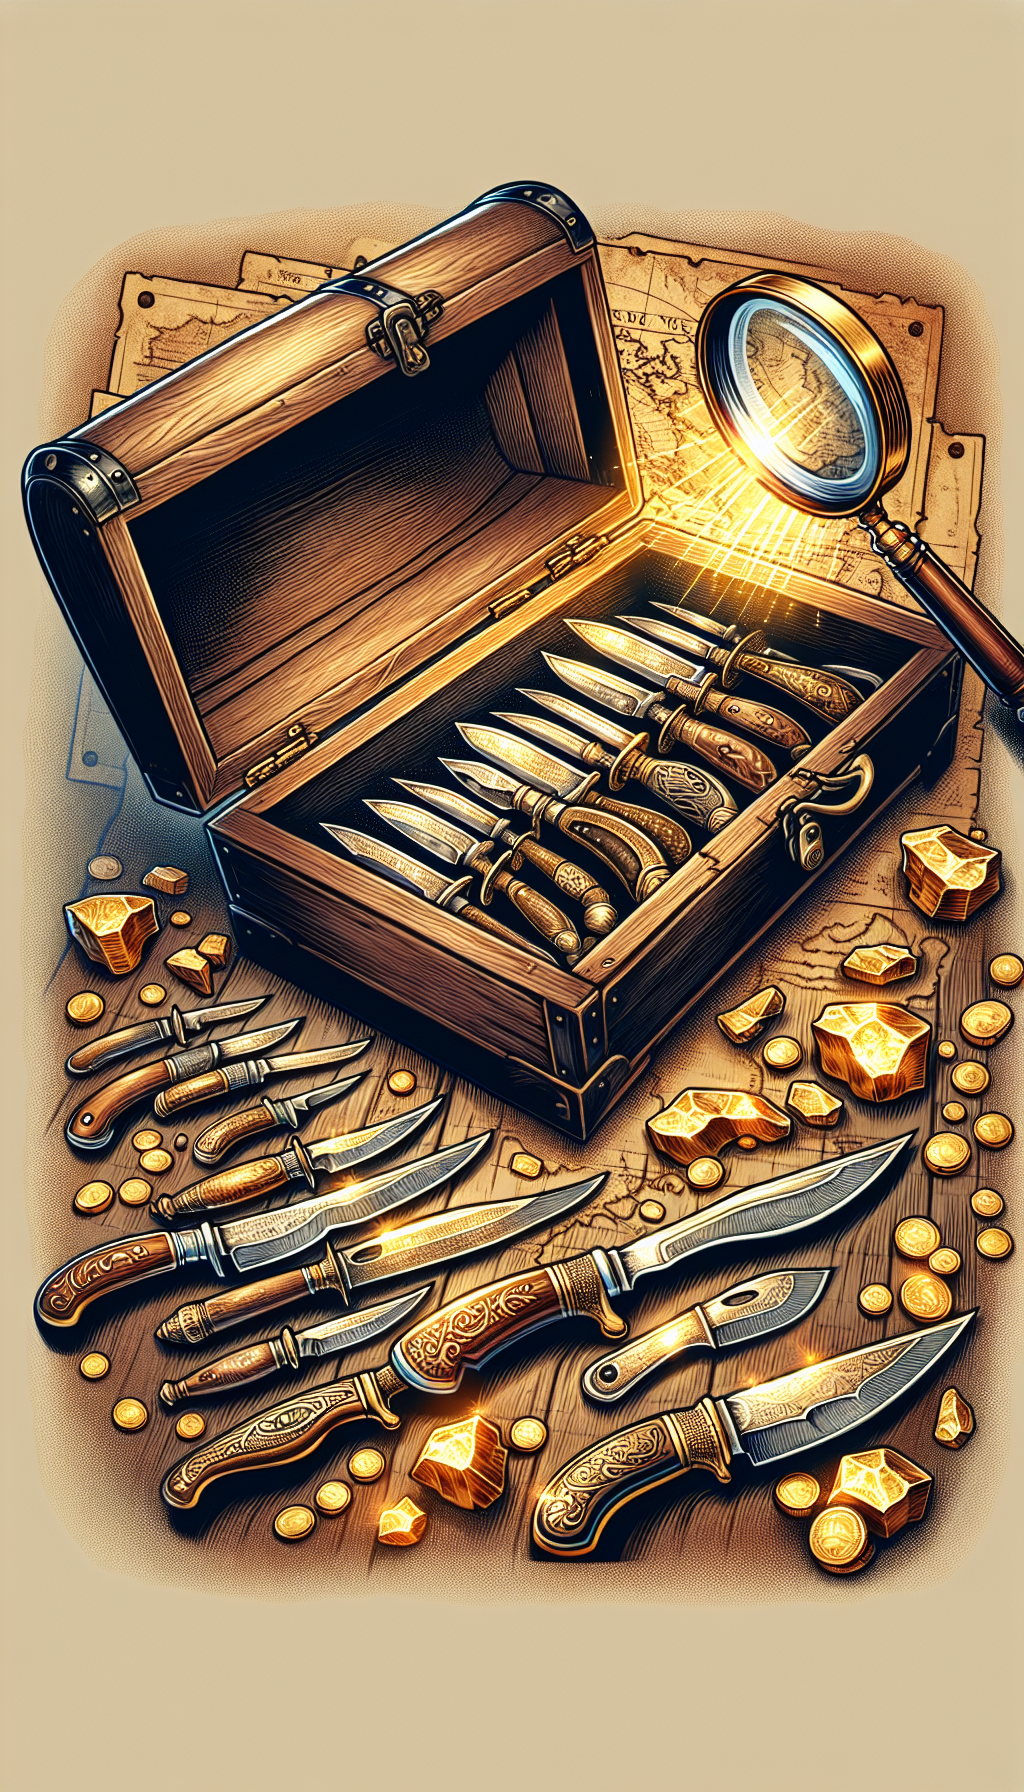 An illustration of an antique wooden treasure chest overflowing with glinting vintage Case knives, each blade reflecting hints of gold nuggets. A classic magnifying glass hovers above, focusing attention on a prominent, intricately designed knife. Styles vary from realistic etchings of the knives to cartoonish gold sheens, accentuating their collective value amidst a faded map background hinting at a quest for appraisal and sale.